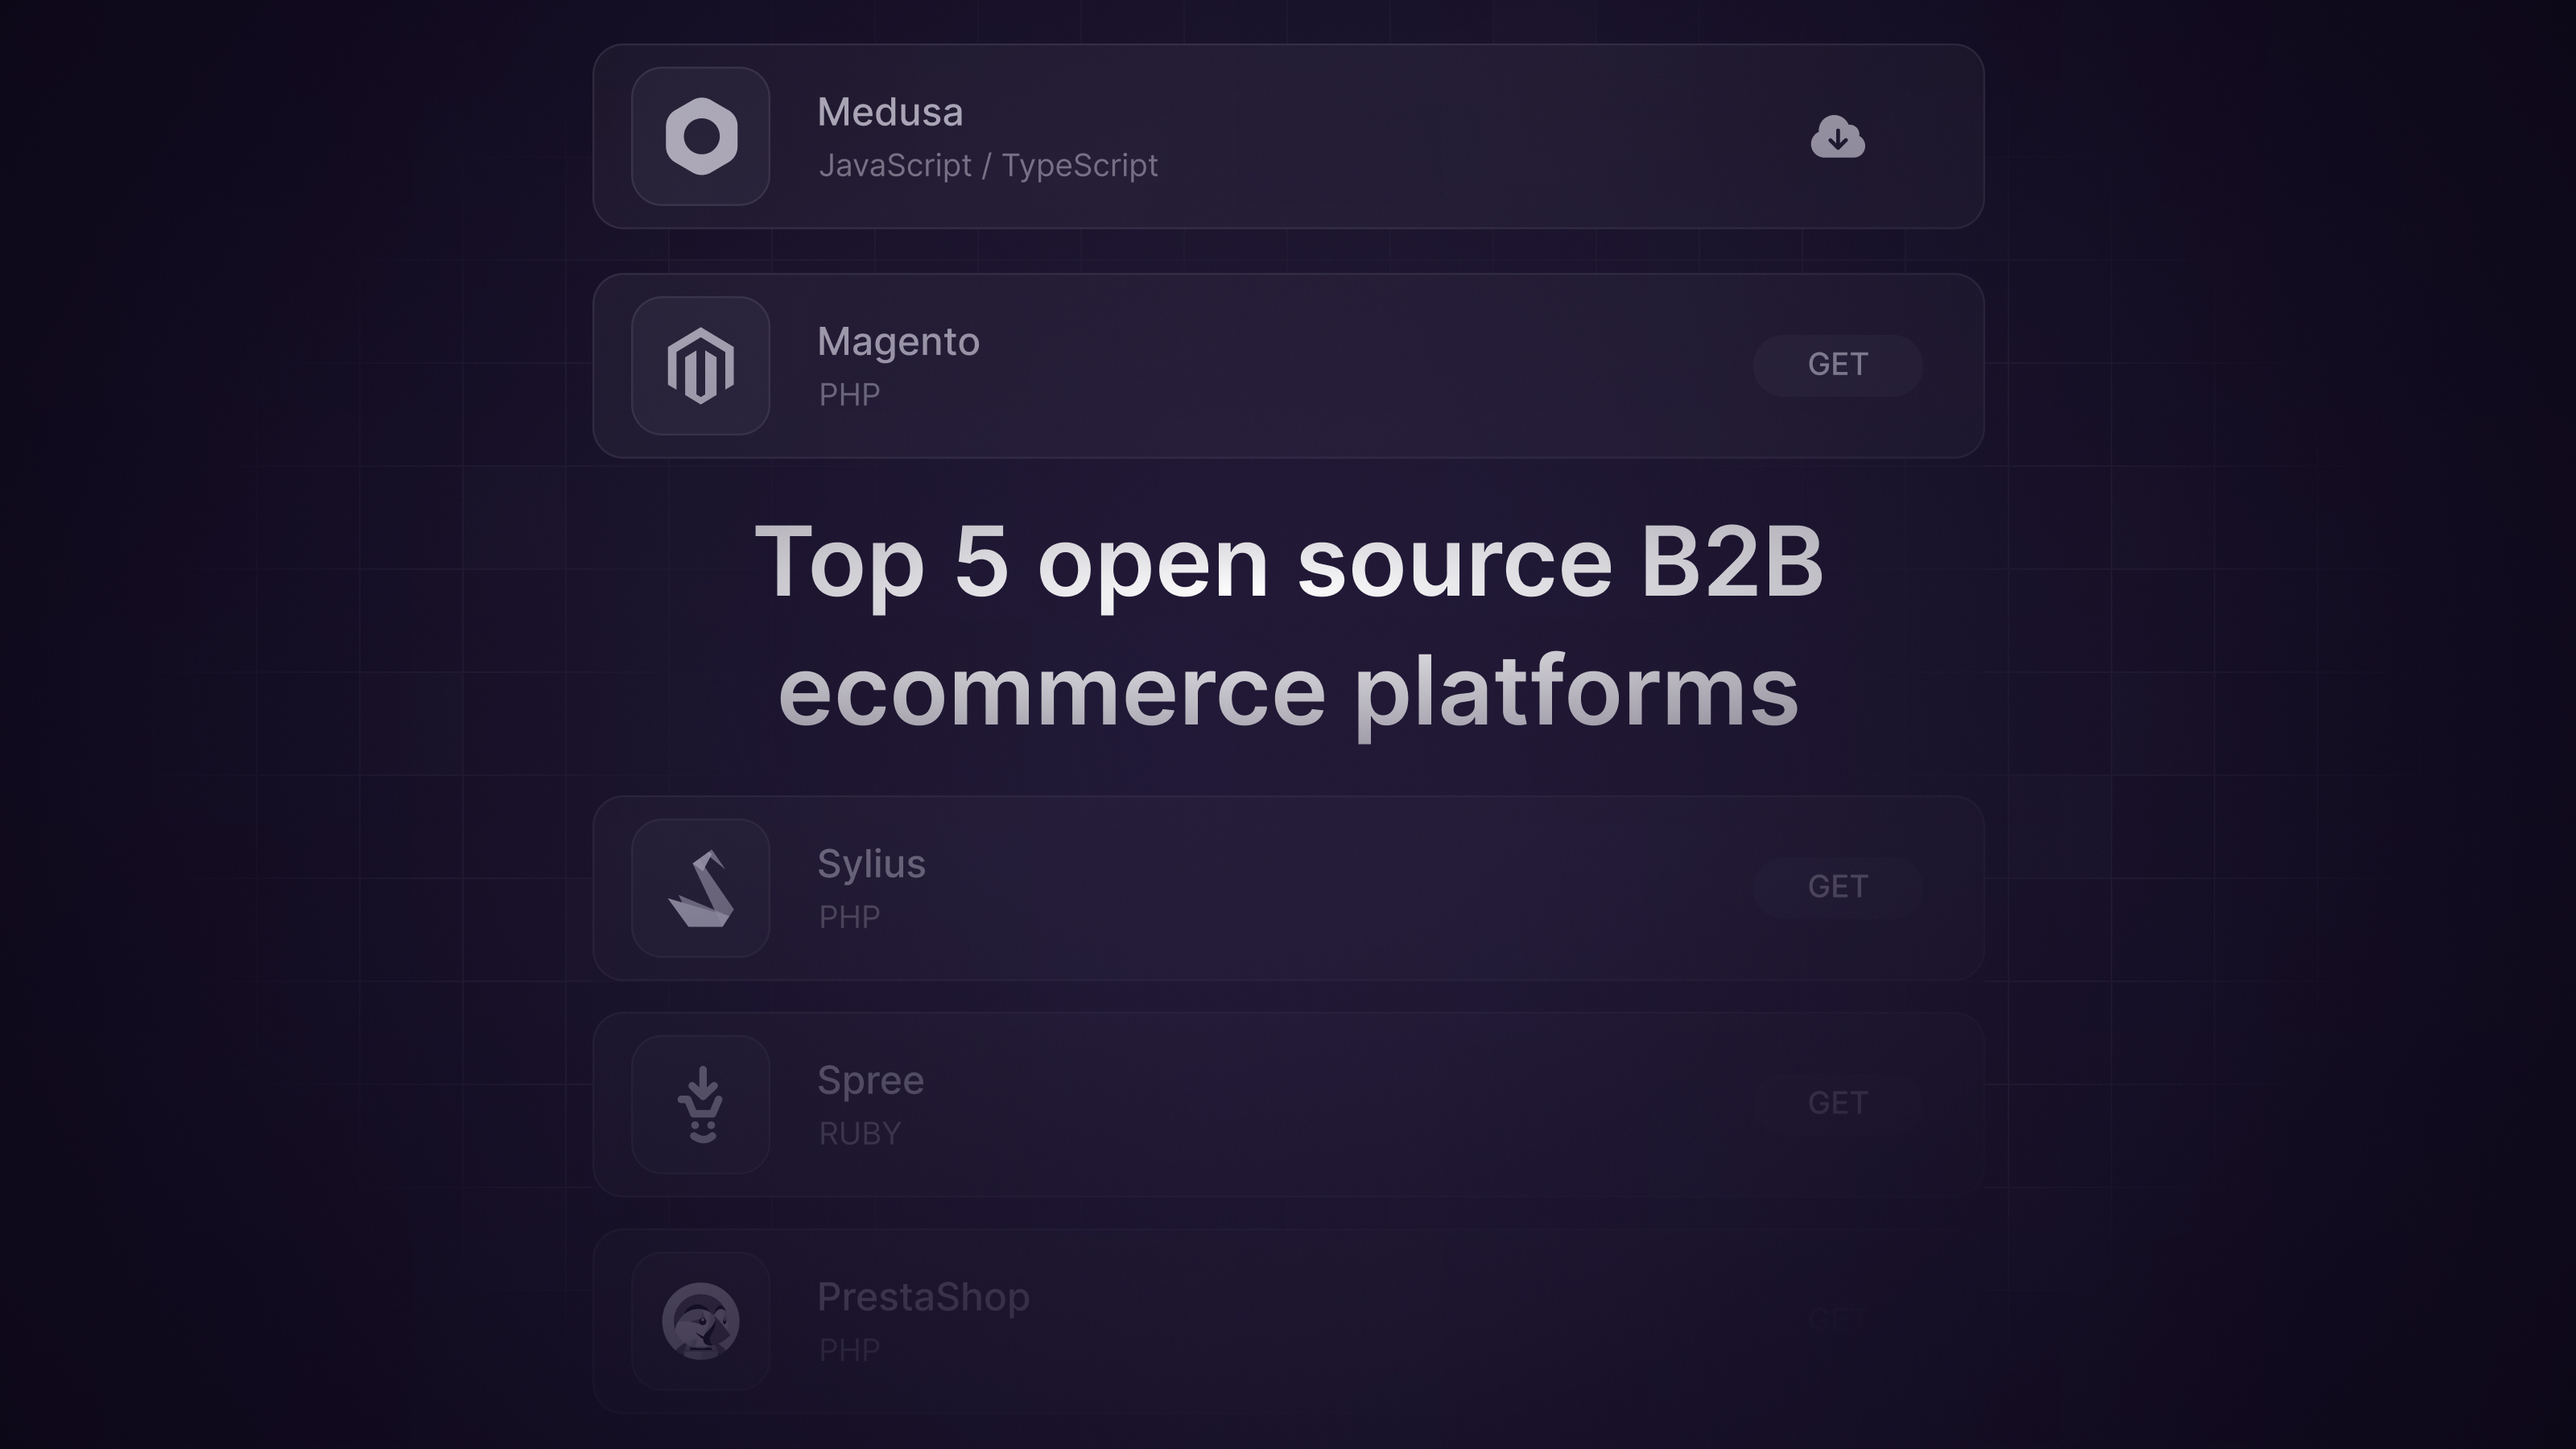 Top 5 open source ecommerce platforms for B2B: A feature-by-feature review